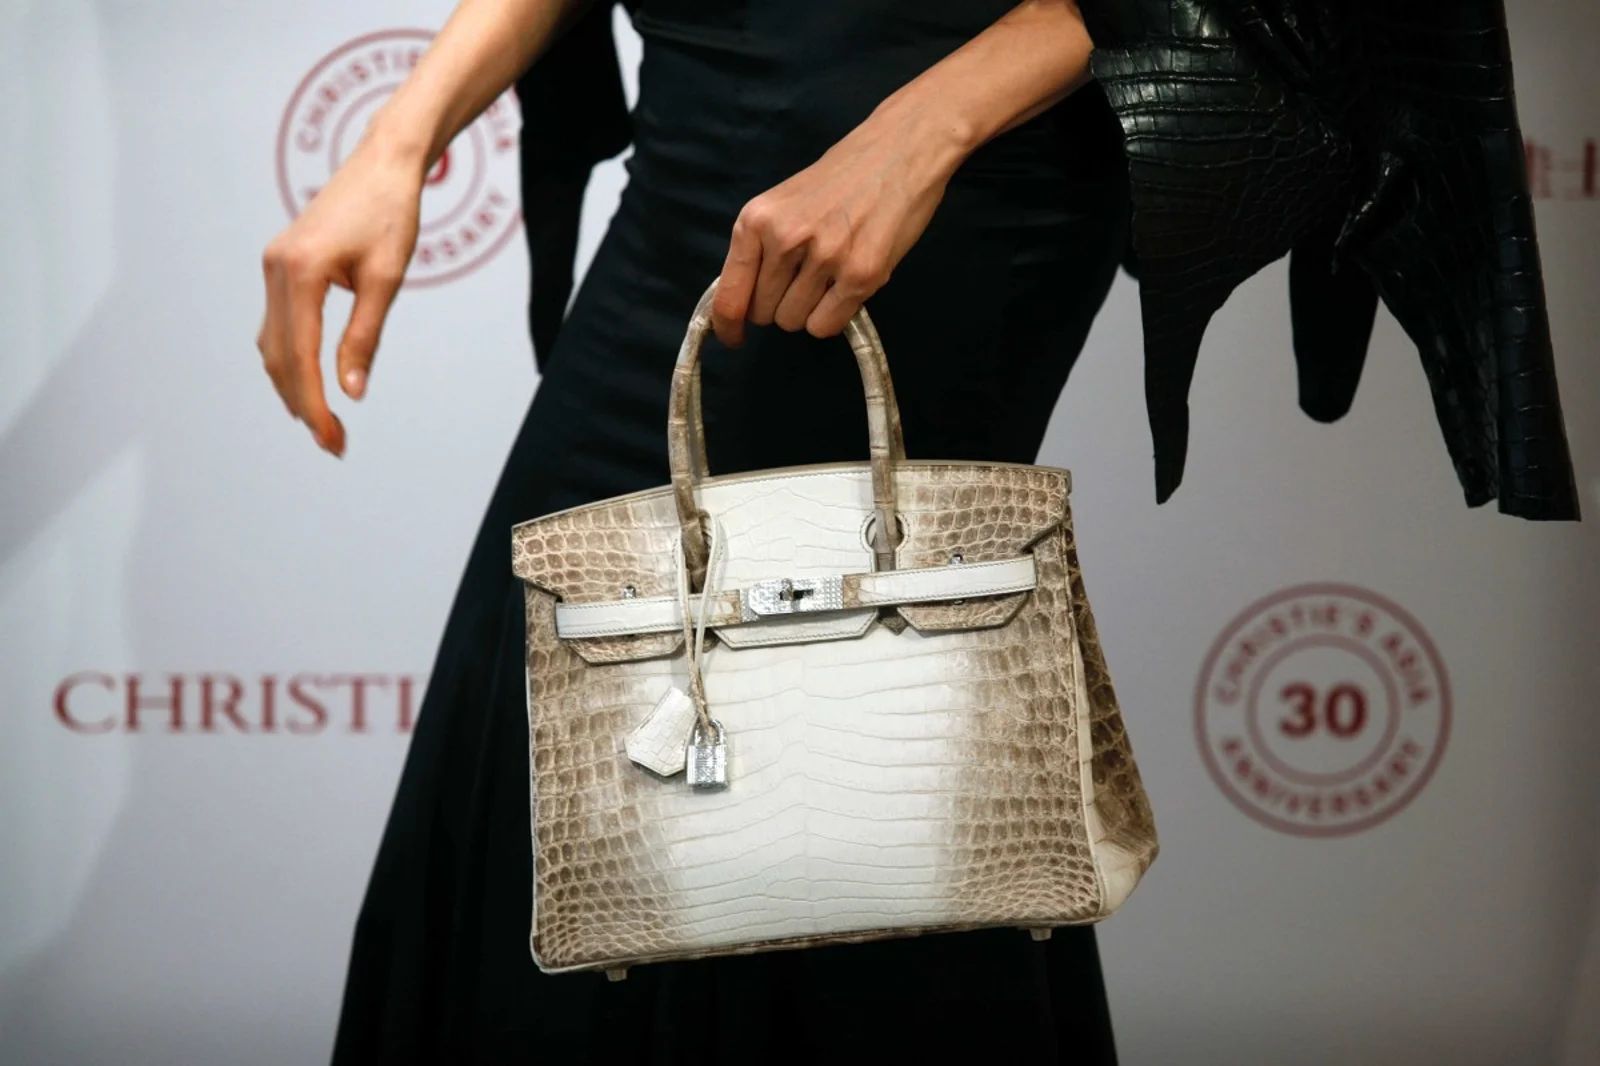 The rich are buying $7,000 plus Hermes handbags so fast that the